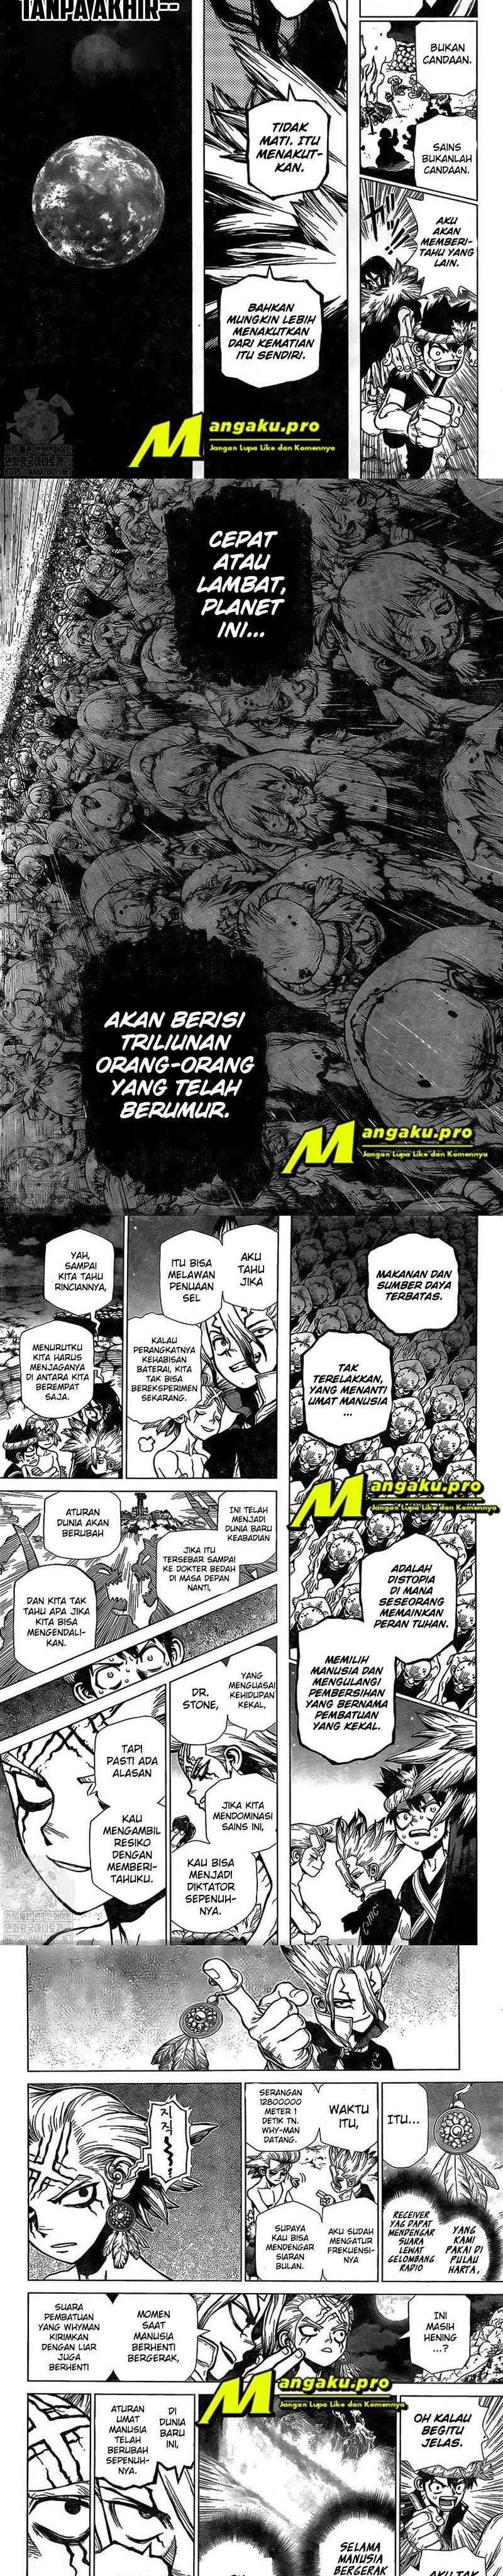 Dr. Stone Chapter 198